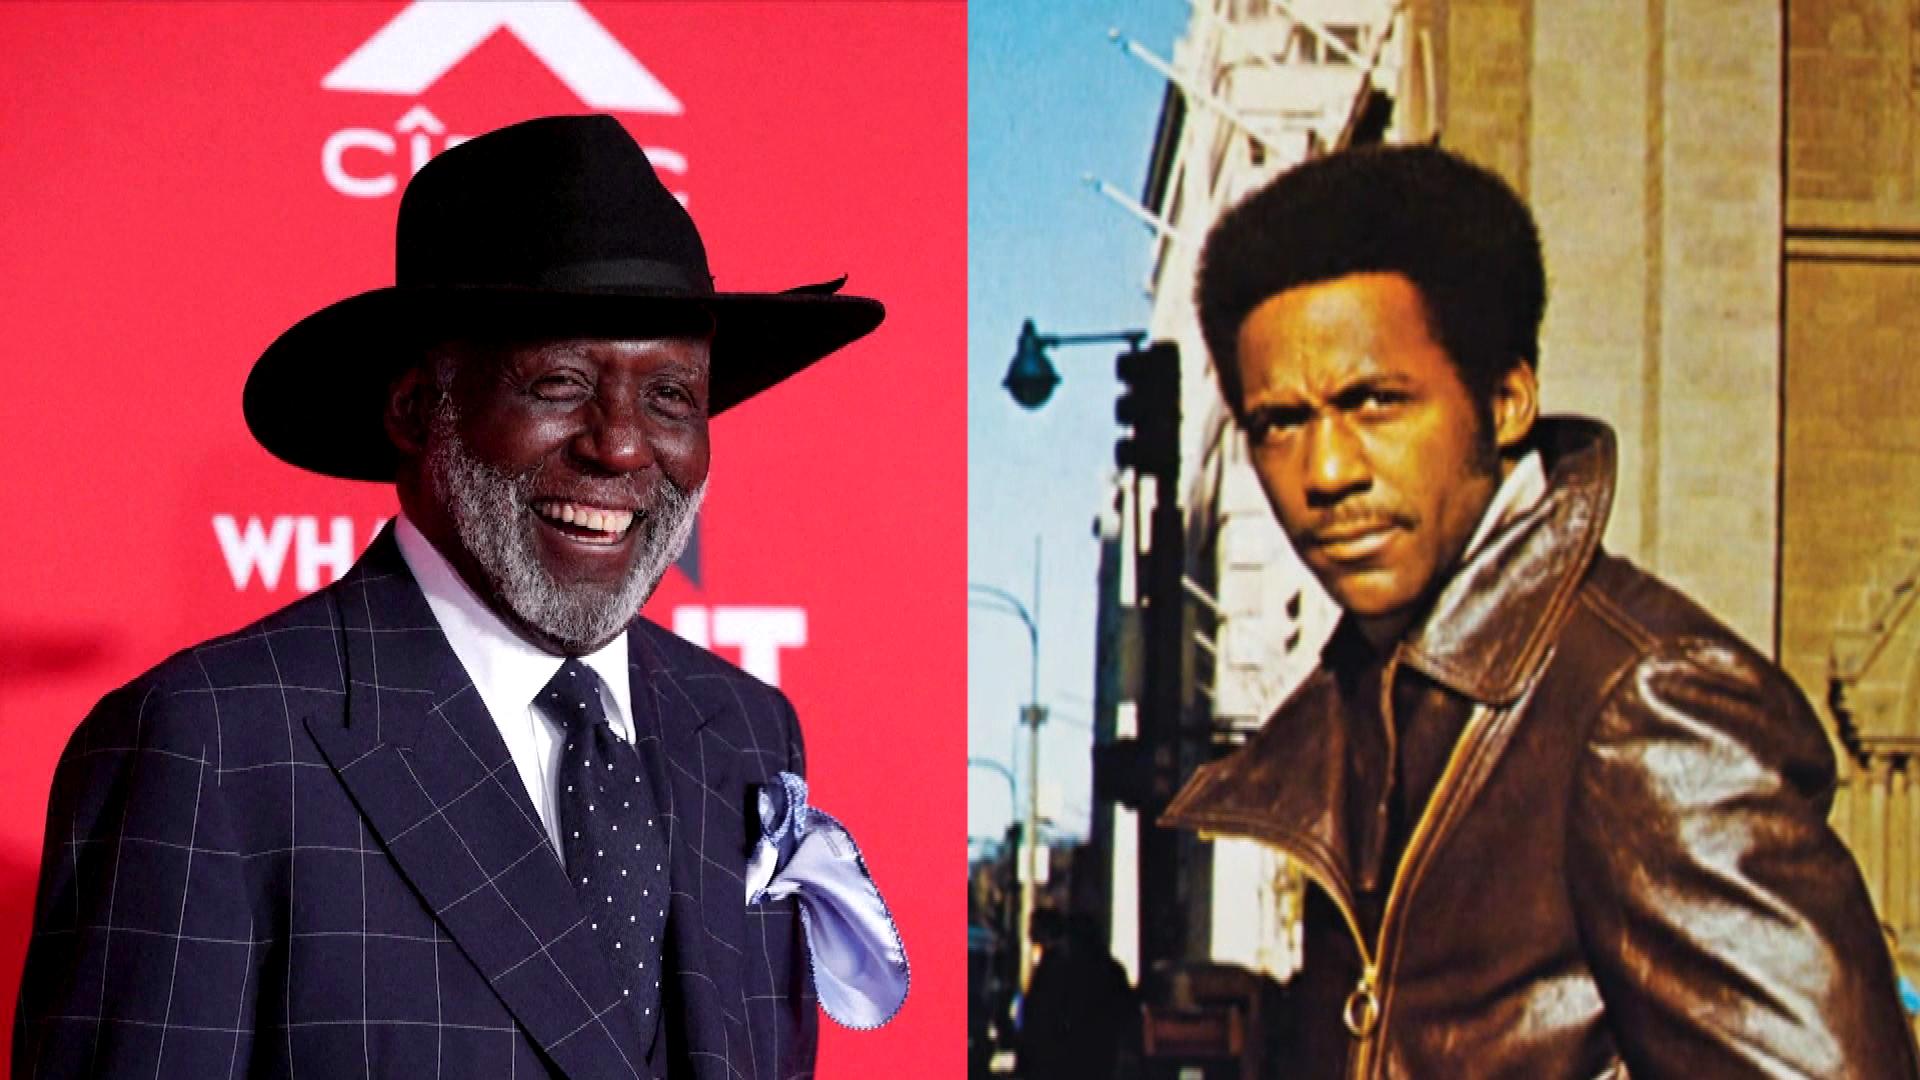 Richard Roundtree, Actor Best Known as 'Shaft,' Dead at 81